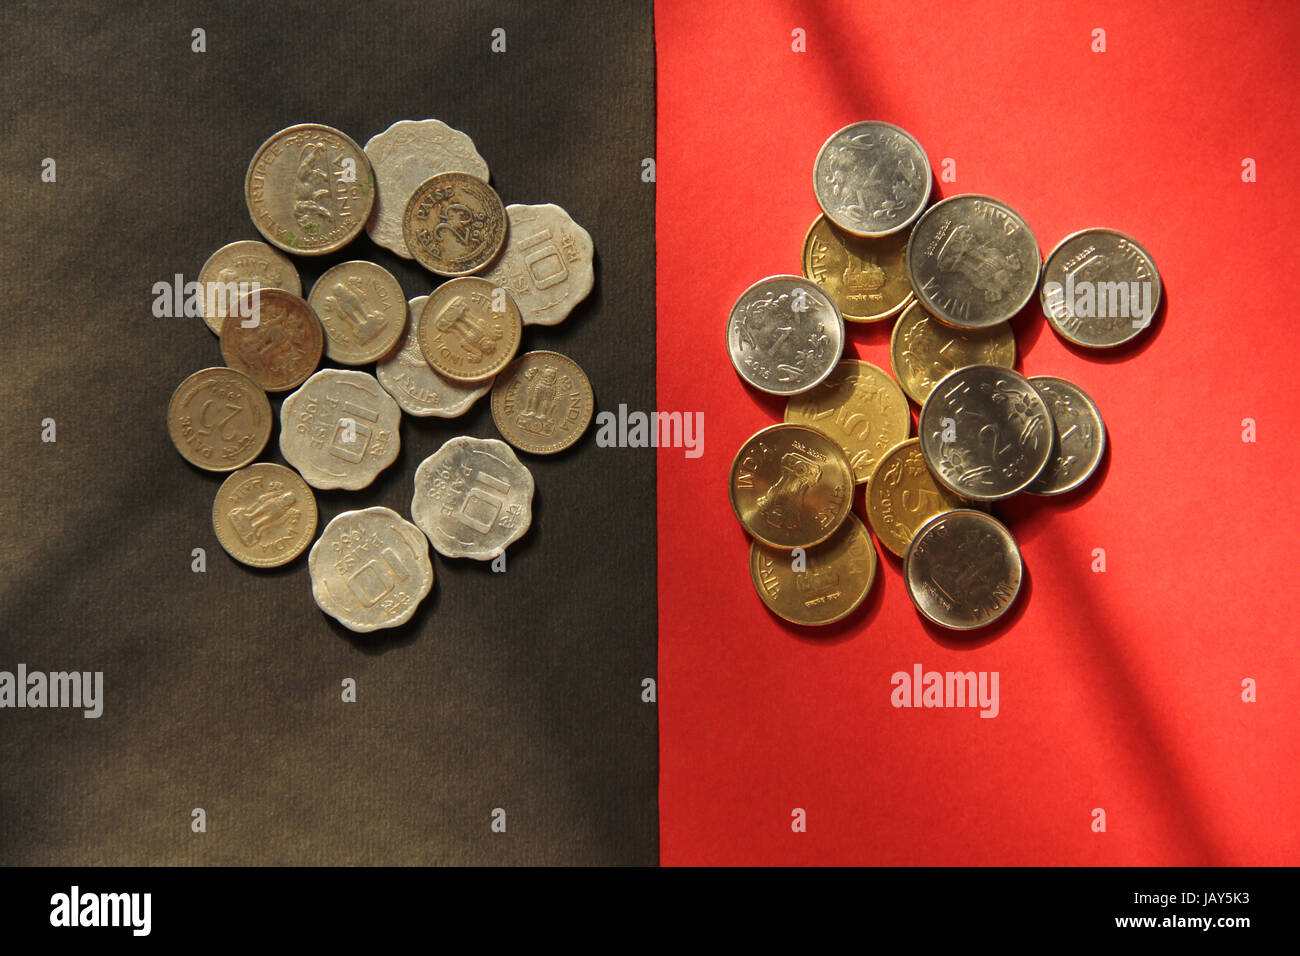 Top view of old and new Indian coins currency Stock Photo